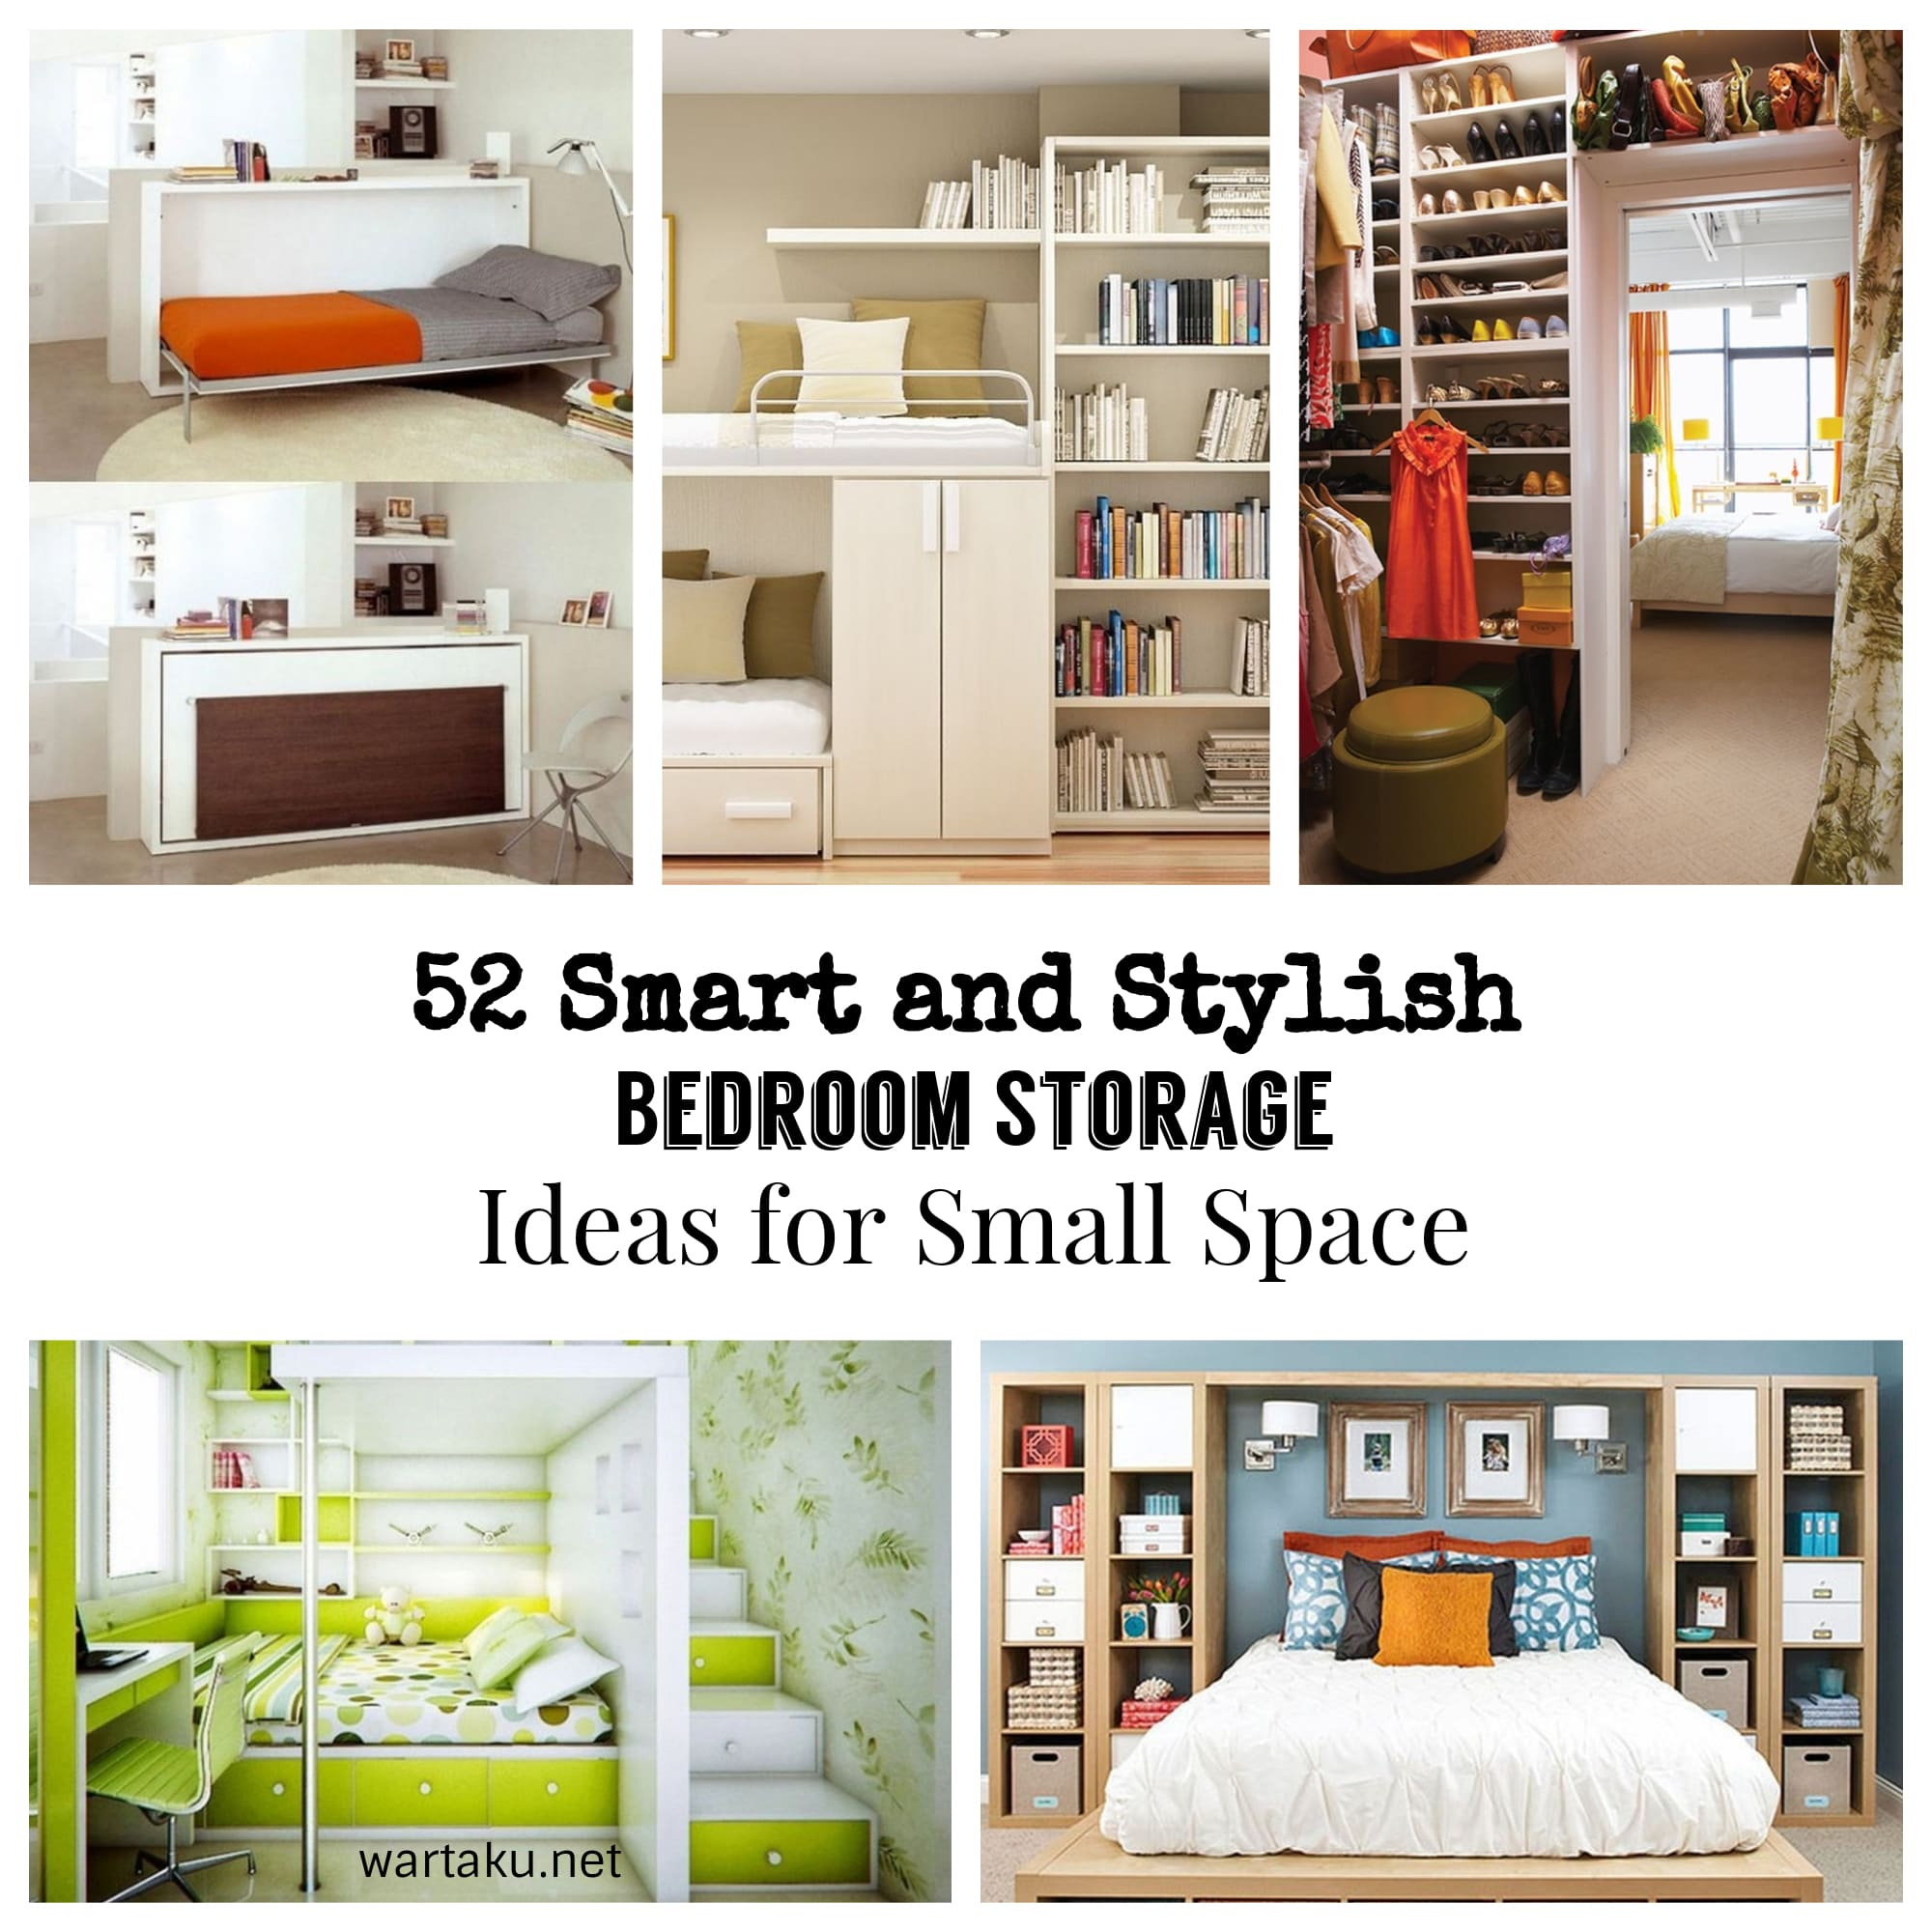 Simphome.com A smart and stylish bedroom storage ideas for small space wartaku with regard to storage ideas for small spaces bedroom